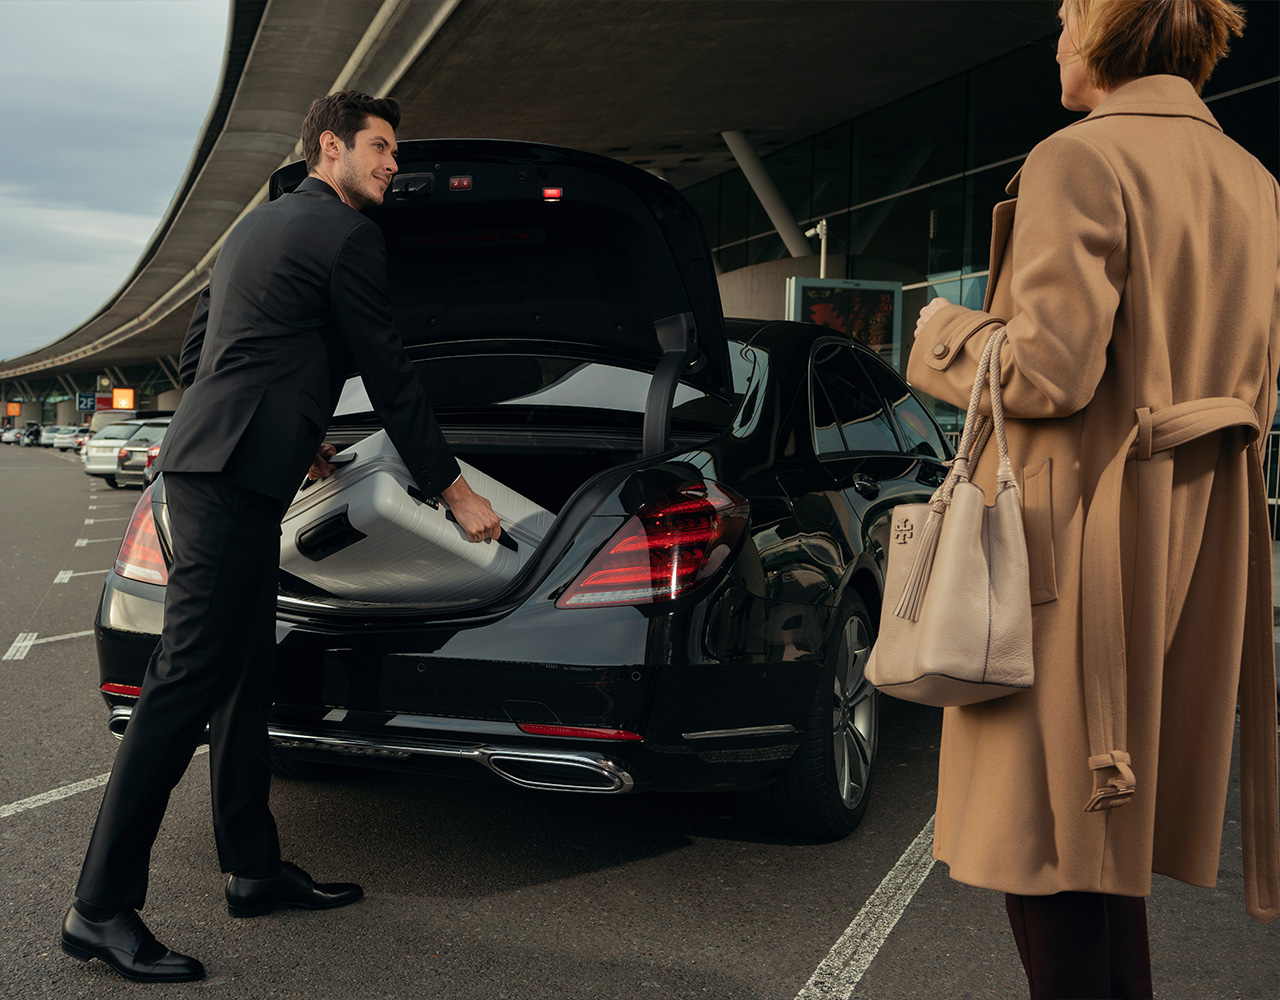 A chauffeur puts some suitcases into the back of a stylish vehicle while a woman waits nearby.